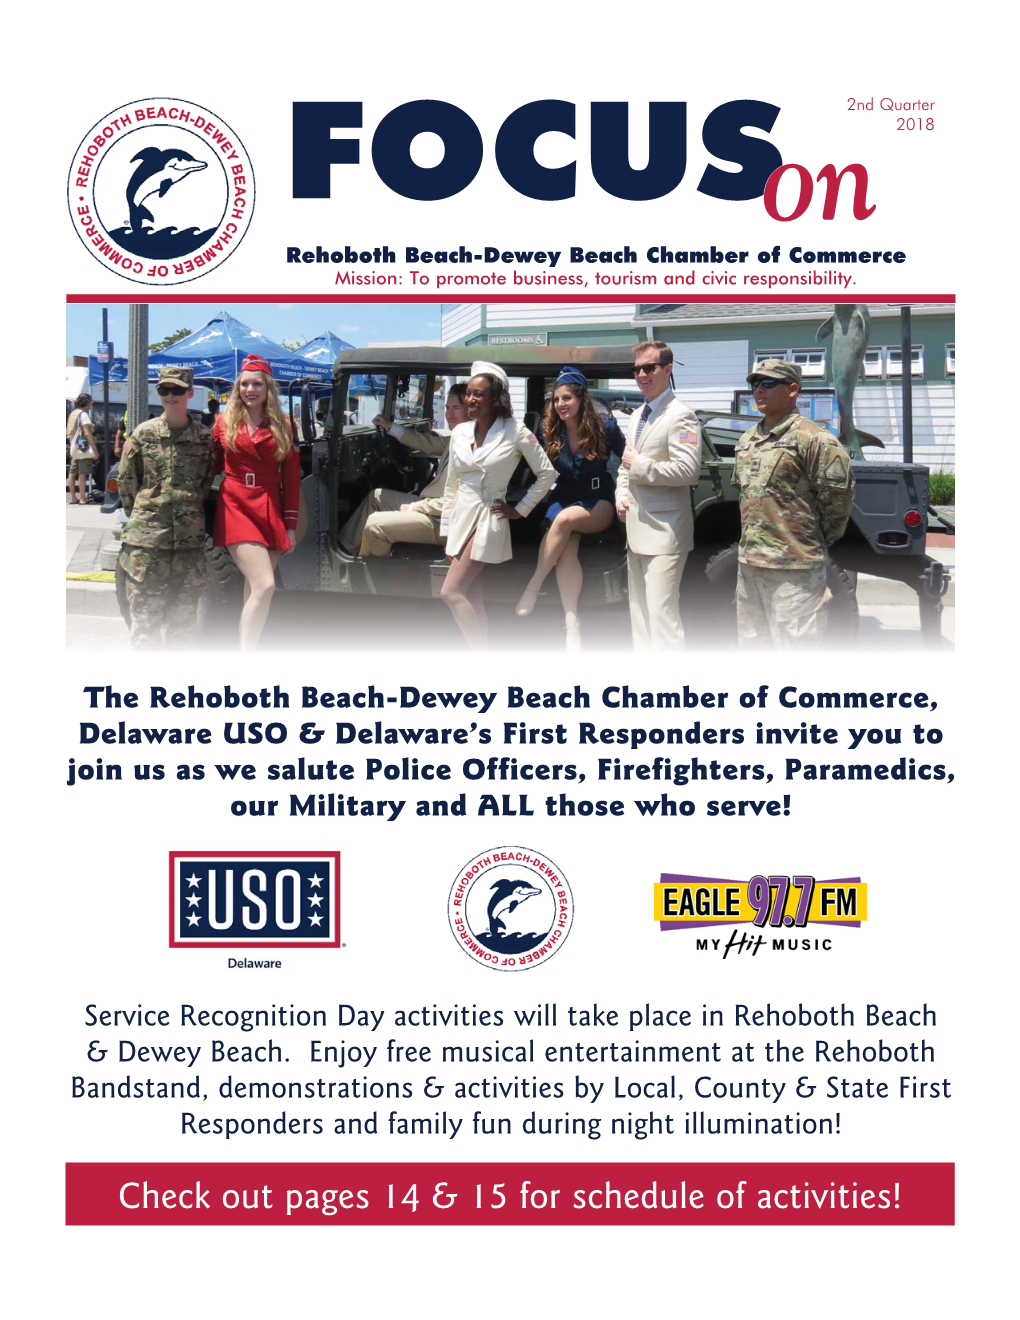 2Nd Quarter Focusoonn 2018 Rehoboth Beach-Dewey Beach Chamber of Commerce Mission: to Promote Business, Tourism and Civic Responsibility